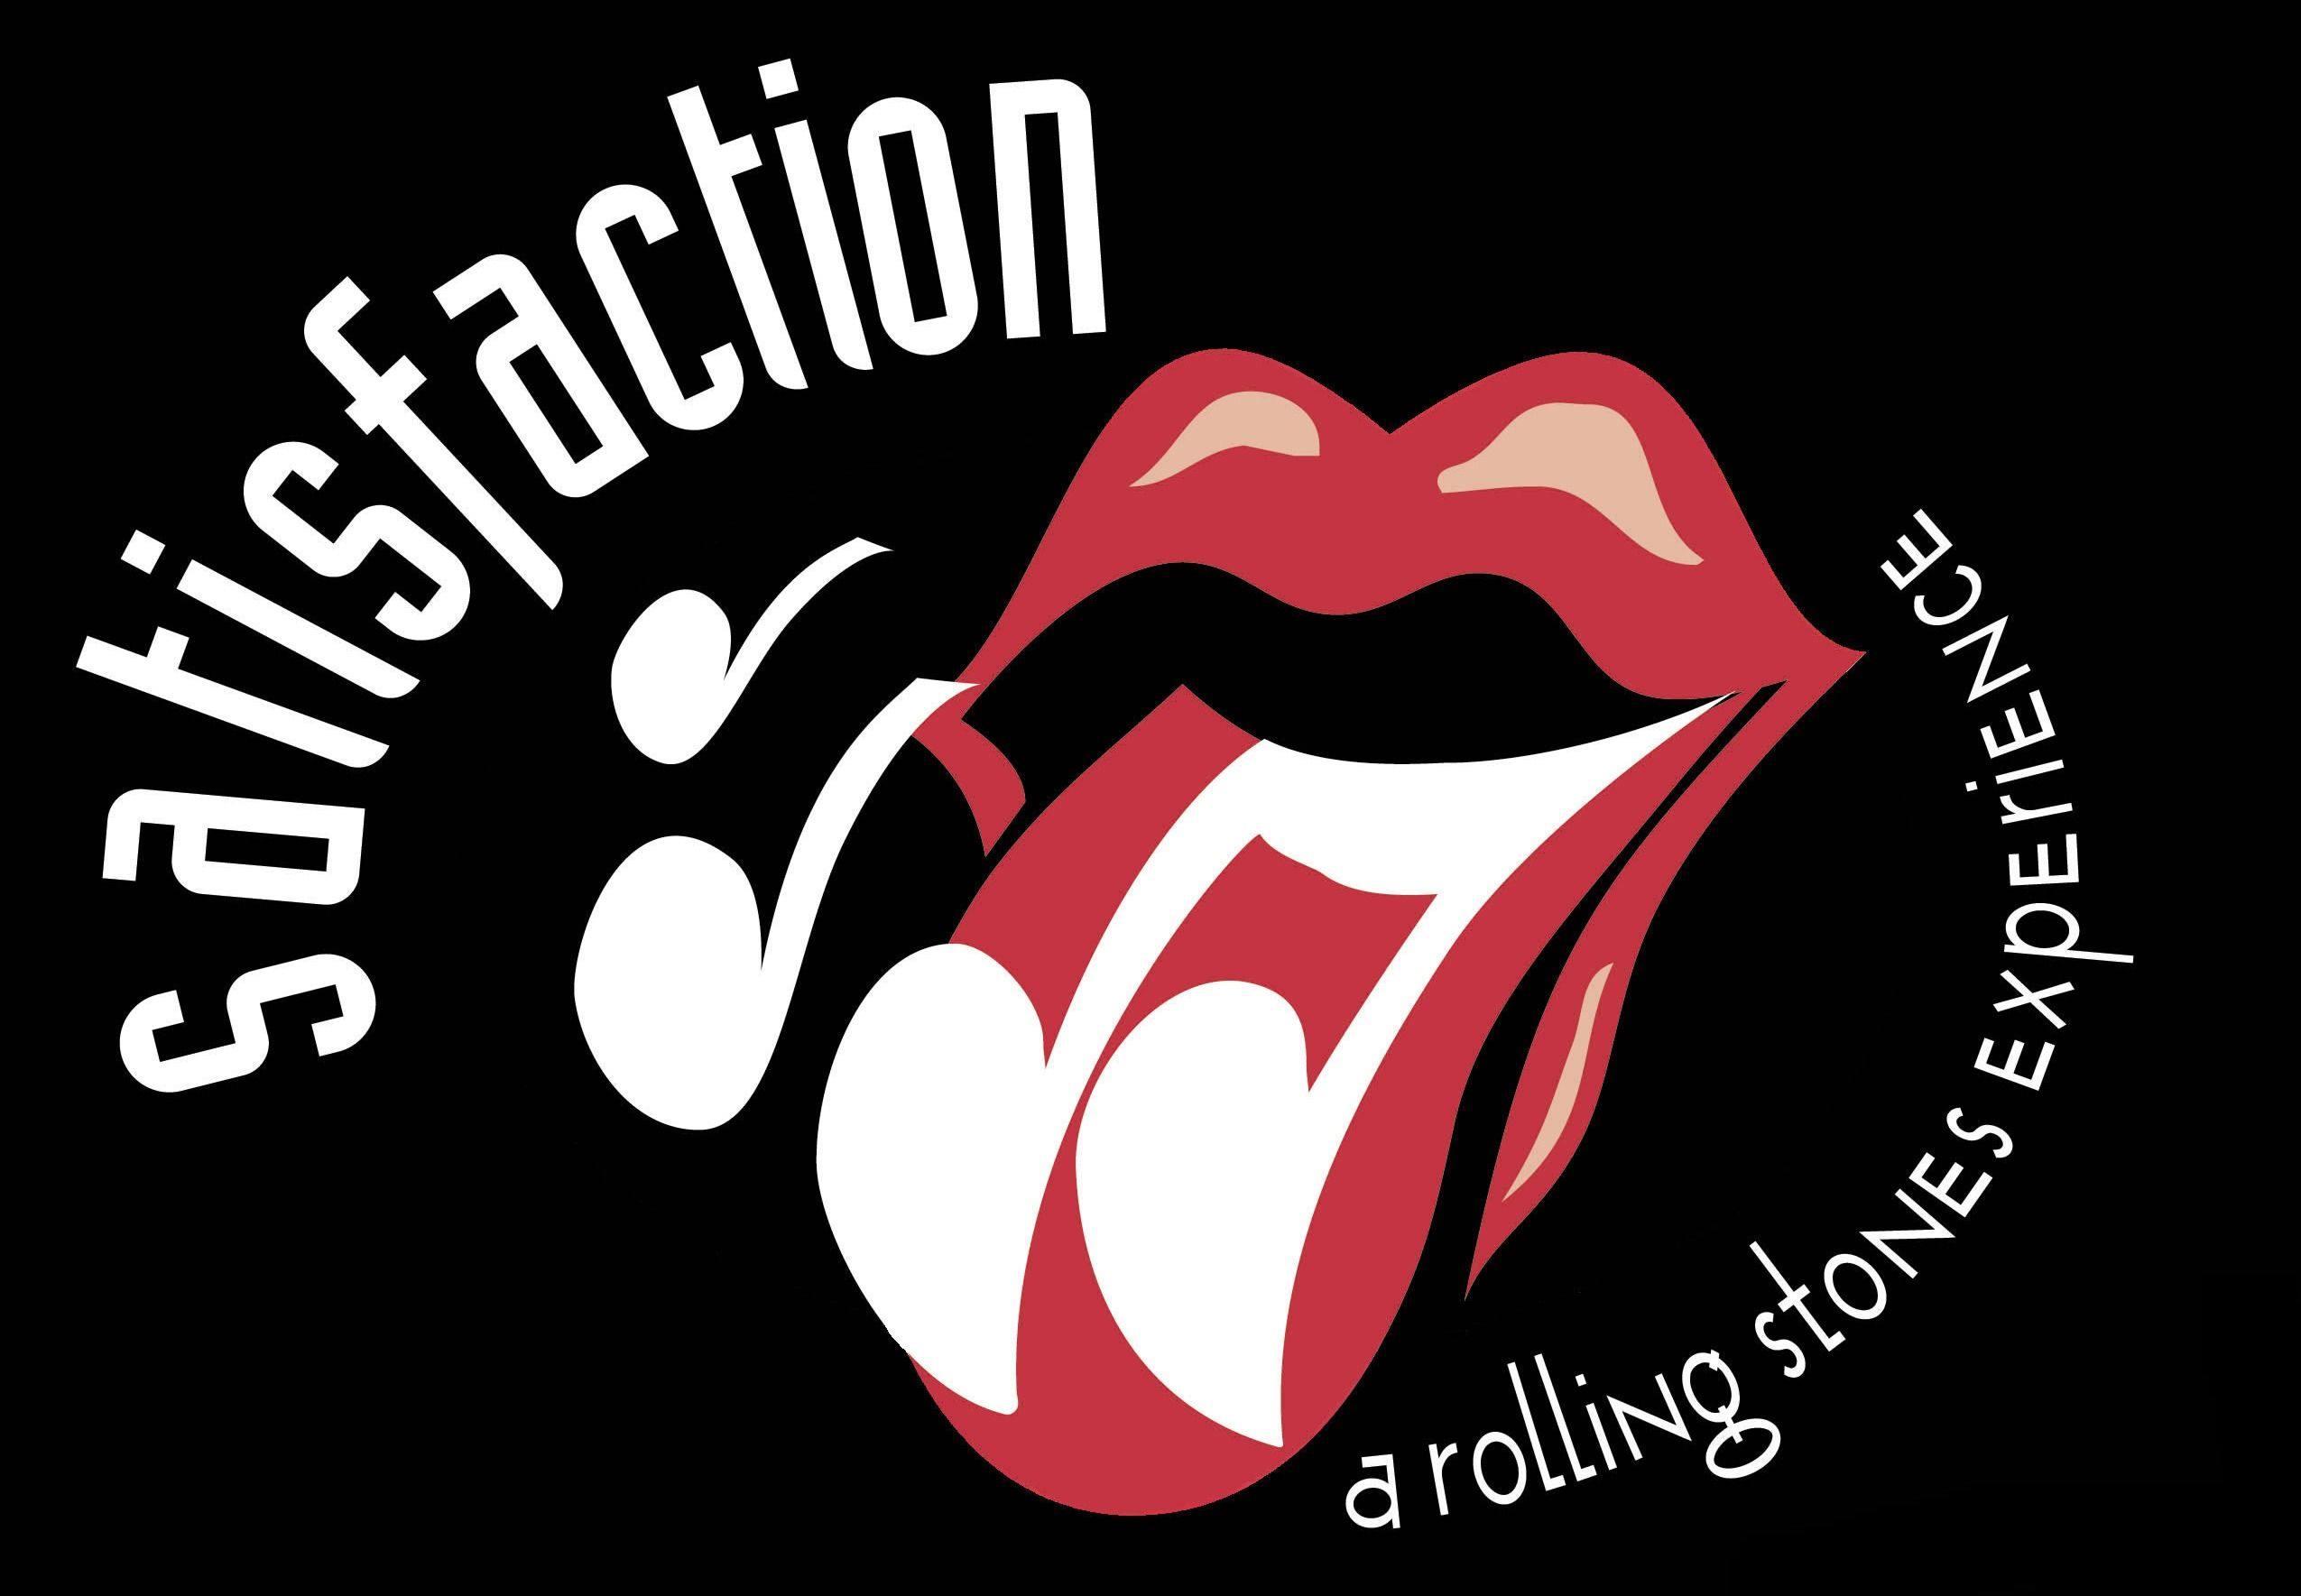 Satisfaction. A Rolling Stones Experience #rolllingstones #rollingstoneslogo #rollingstonesphotos #rol. Rolling stones logo, Rolling stones, Rolling stones music